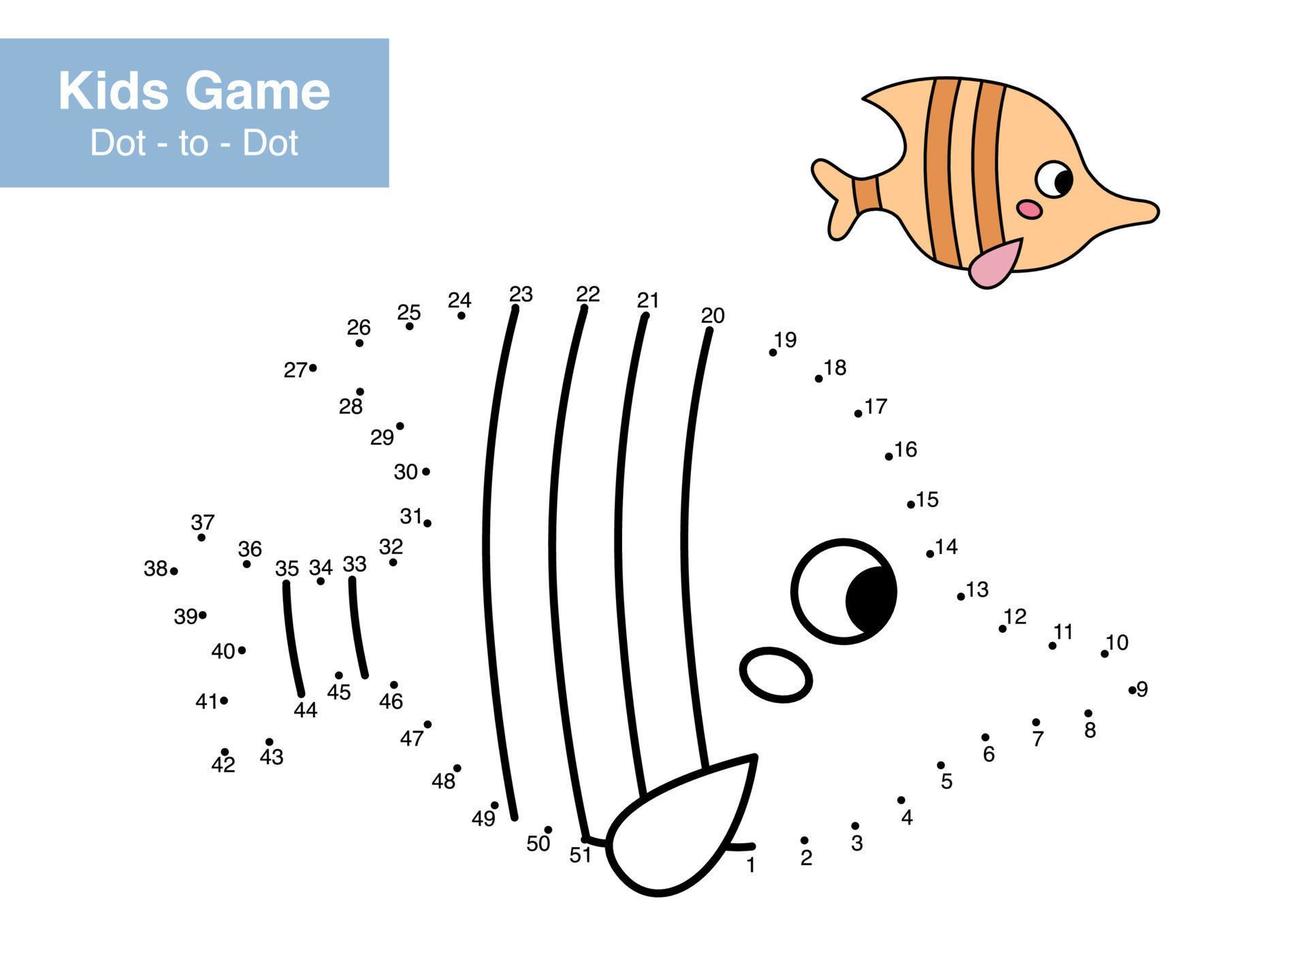 Dot to dot educational game for kids. Cute cartoon fish. Numbers game. Activity worksheet for children. Connect the dots and color. Vector illustration